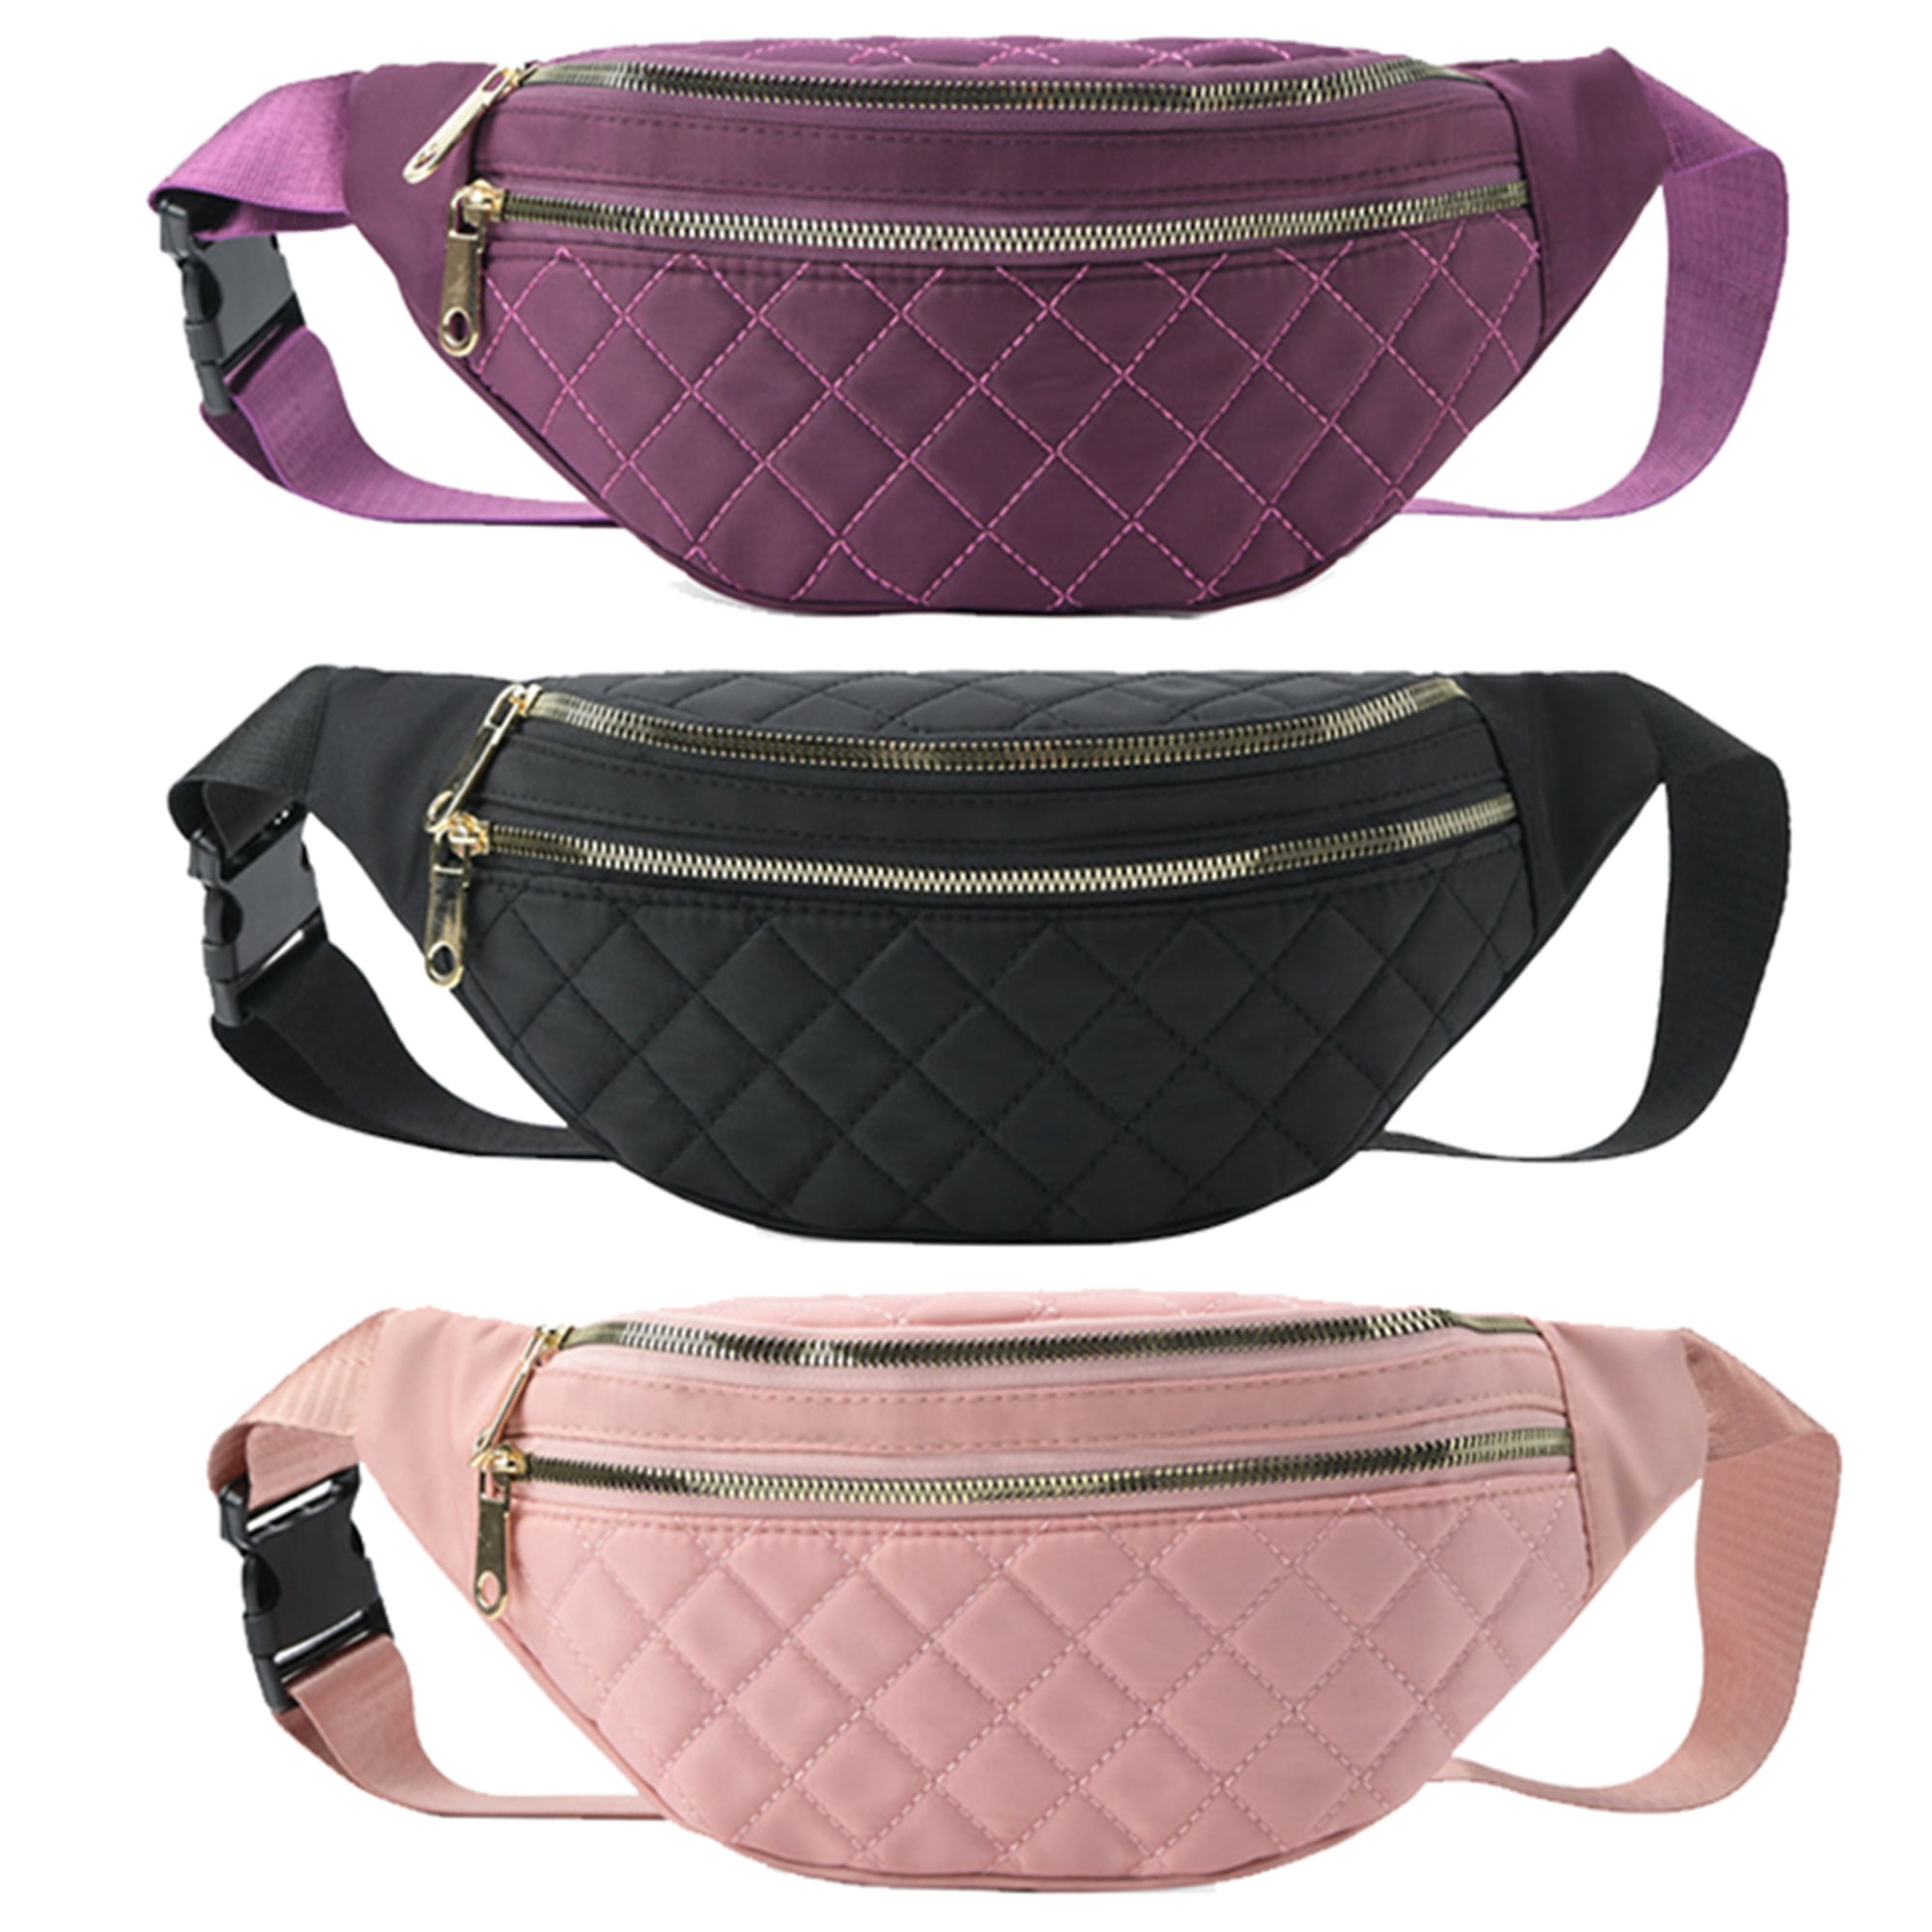 Supreme Fabric Waist Bags & Fanny Packs for Women